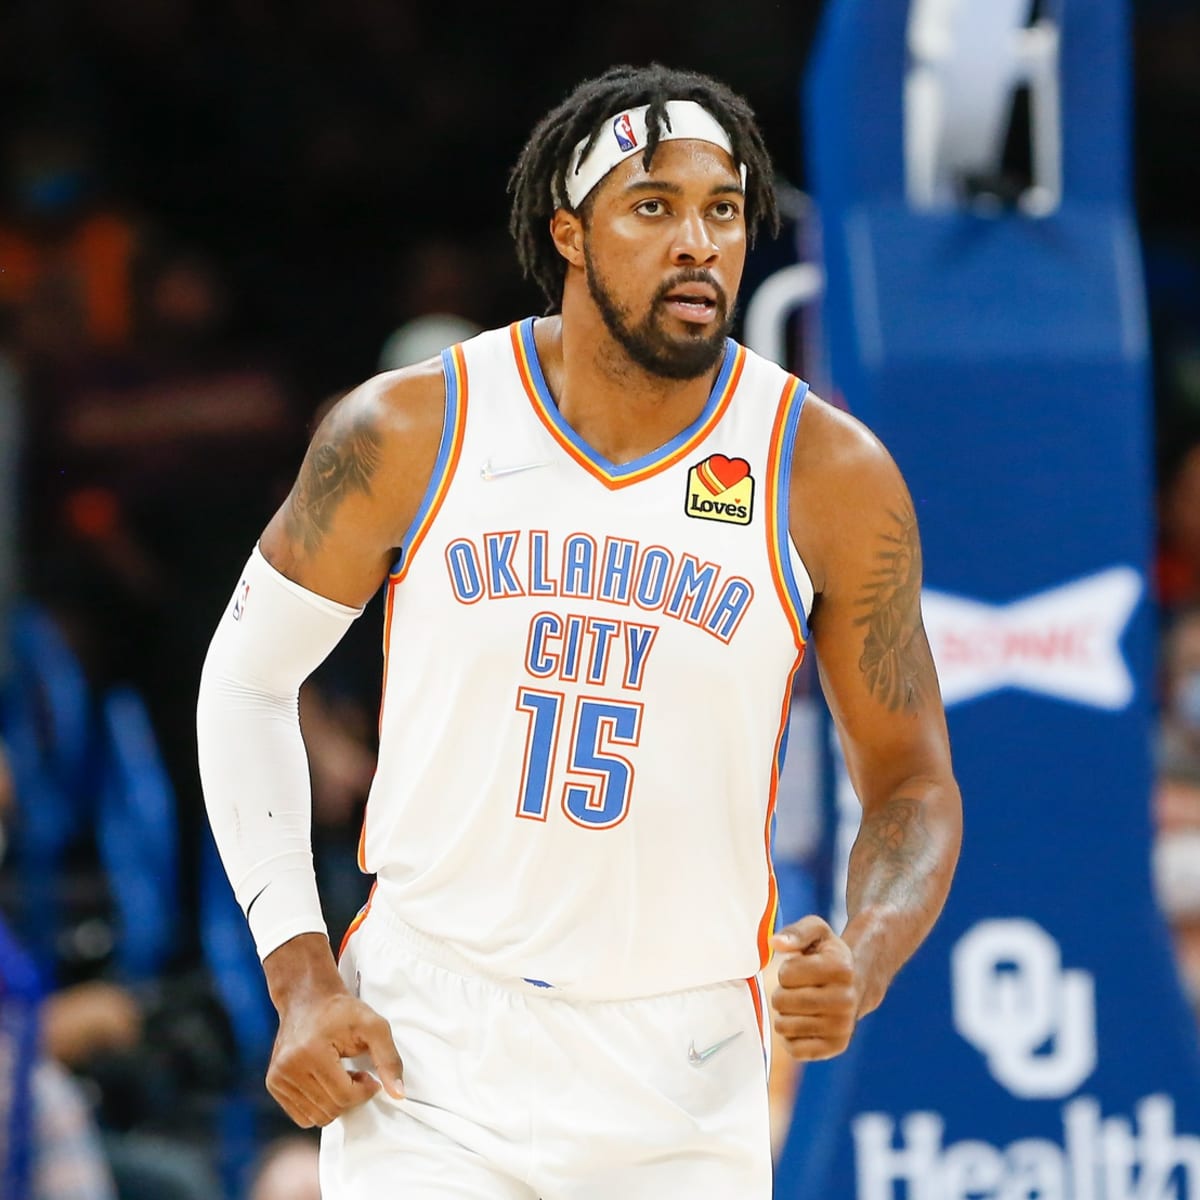 The Rockets have traded Kevin Porter to the Thunder, and Oklahoma